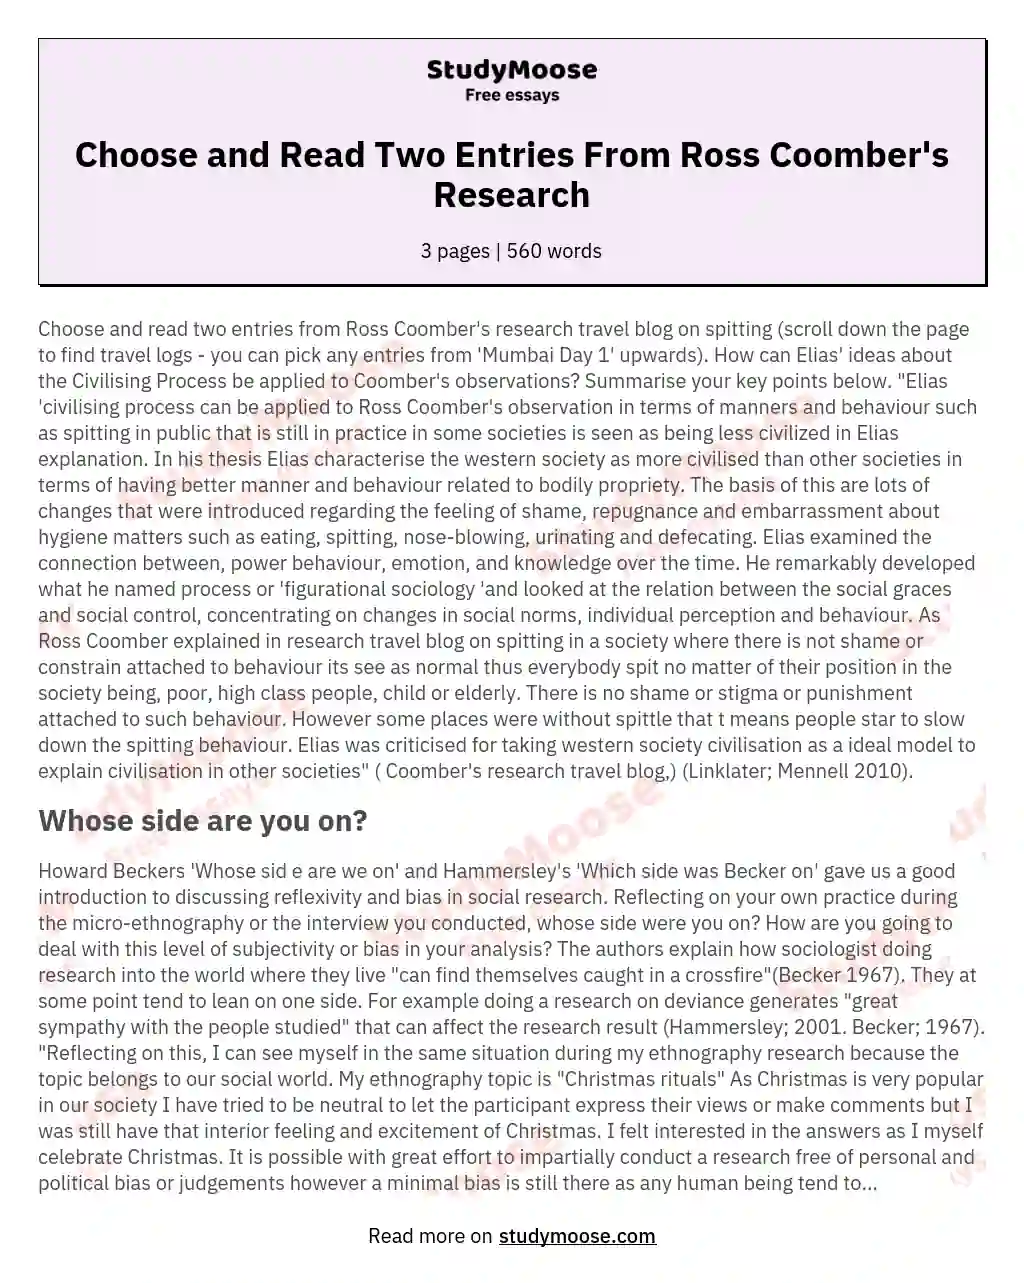 Choose and Read Two Entries From Ross Coomber's Research essay